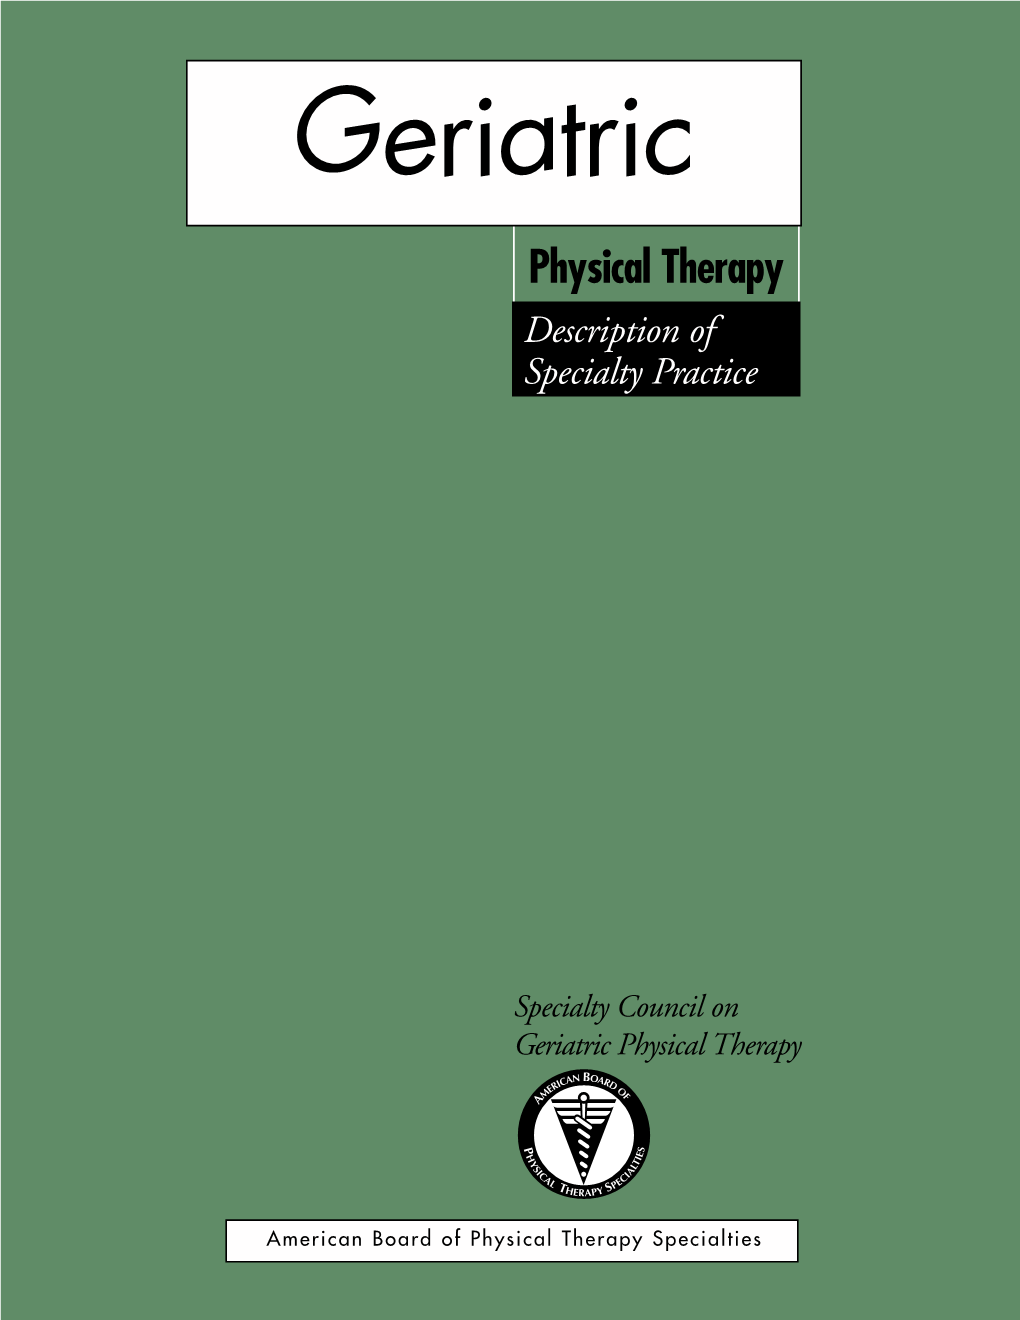 Geriatric Physical Therapy Description of Specialty Practice